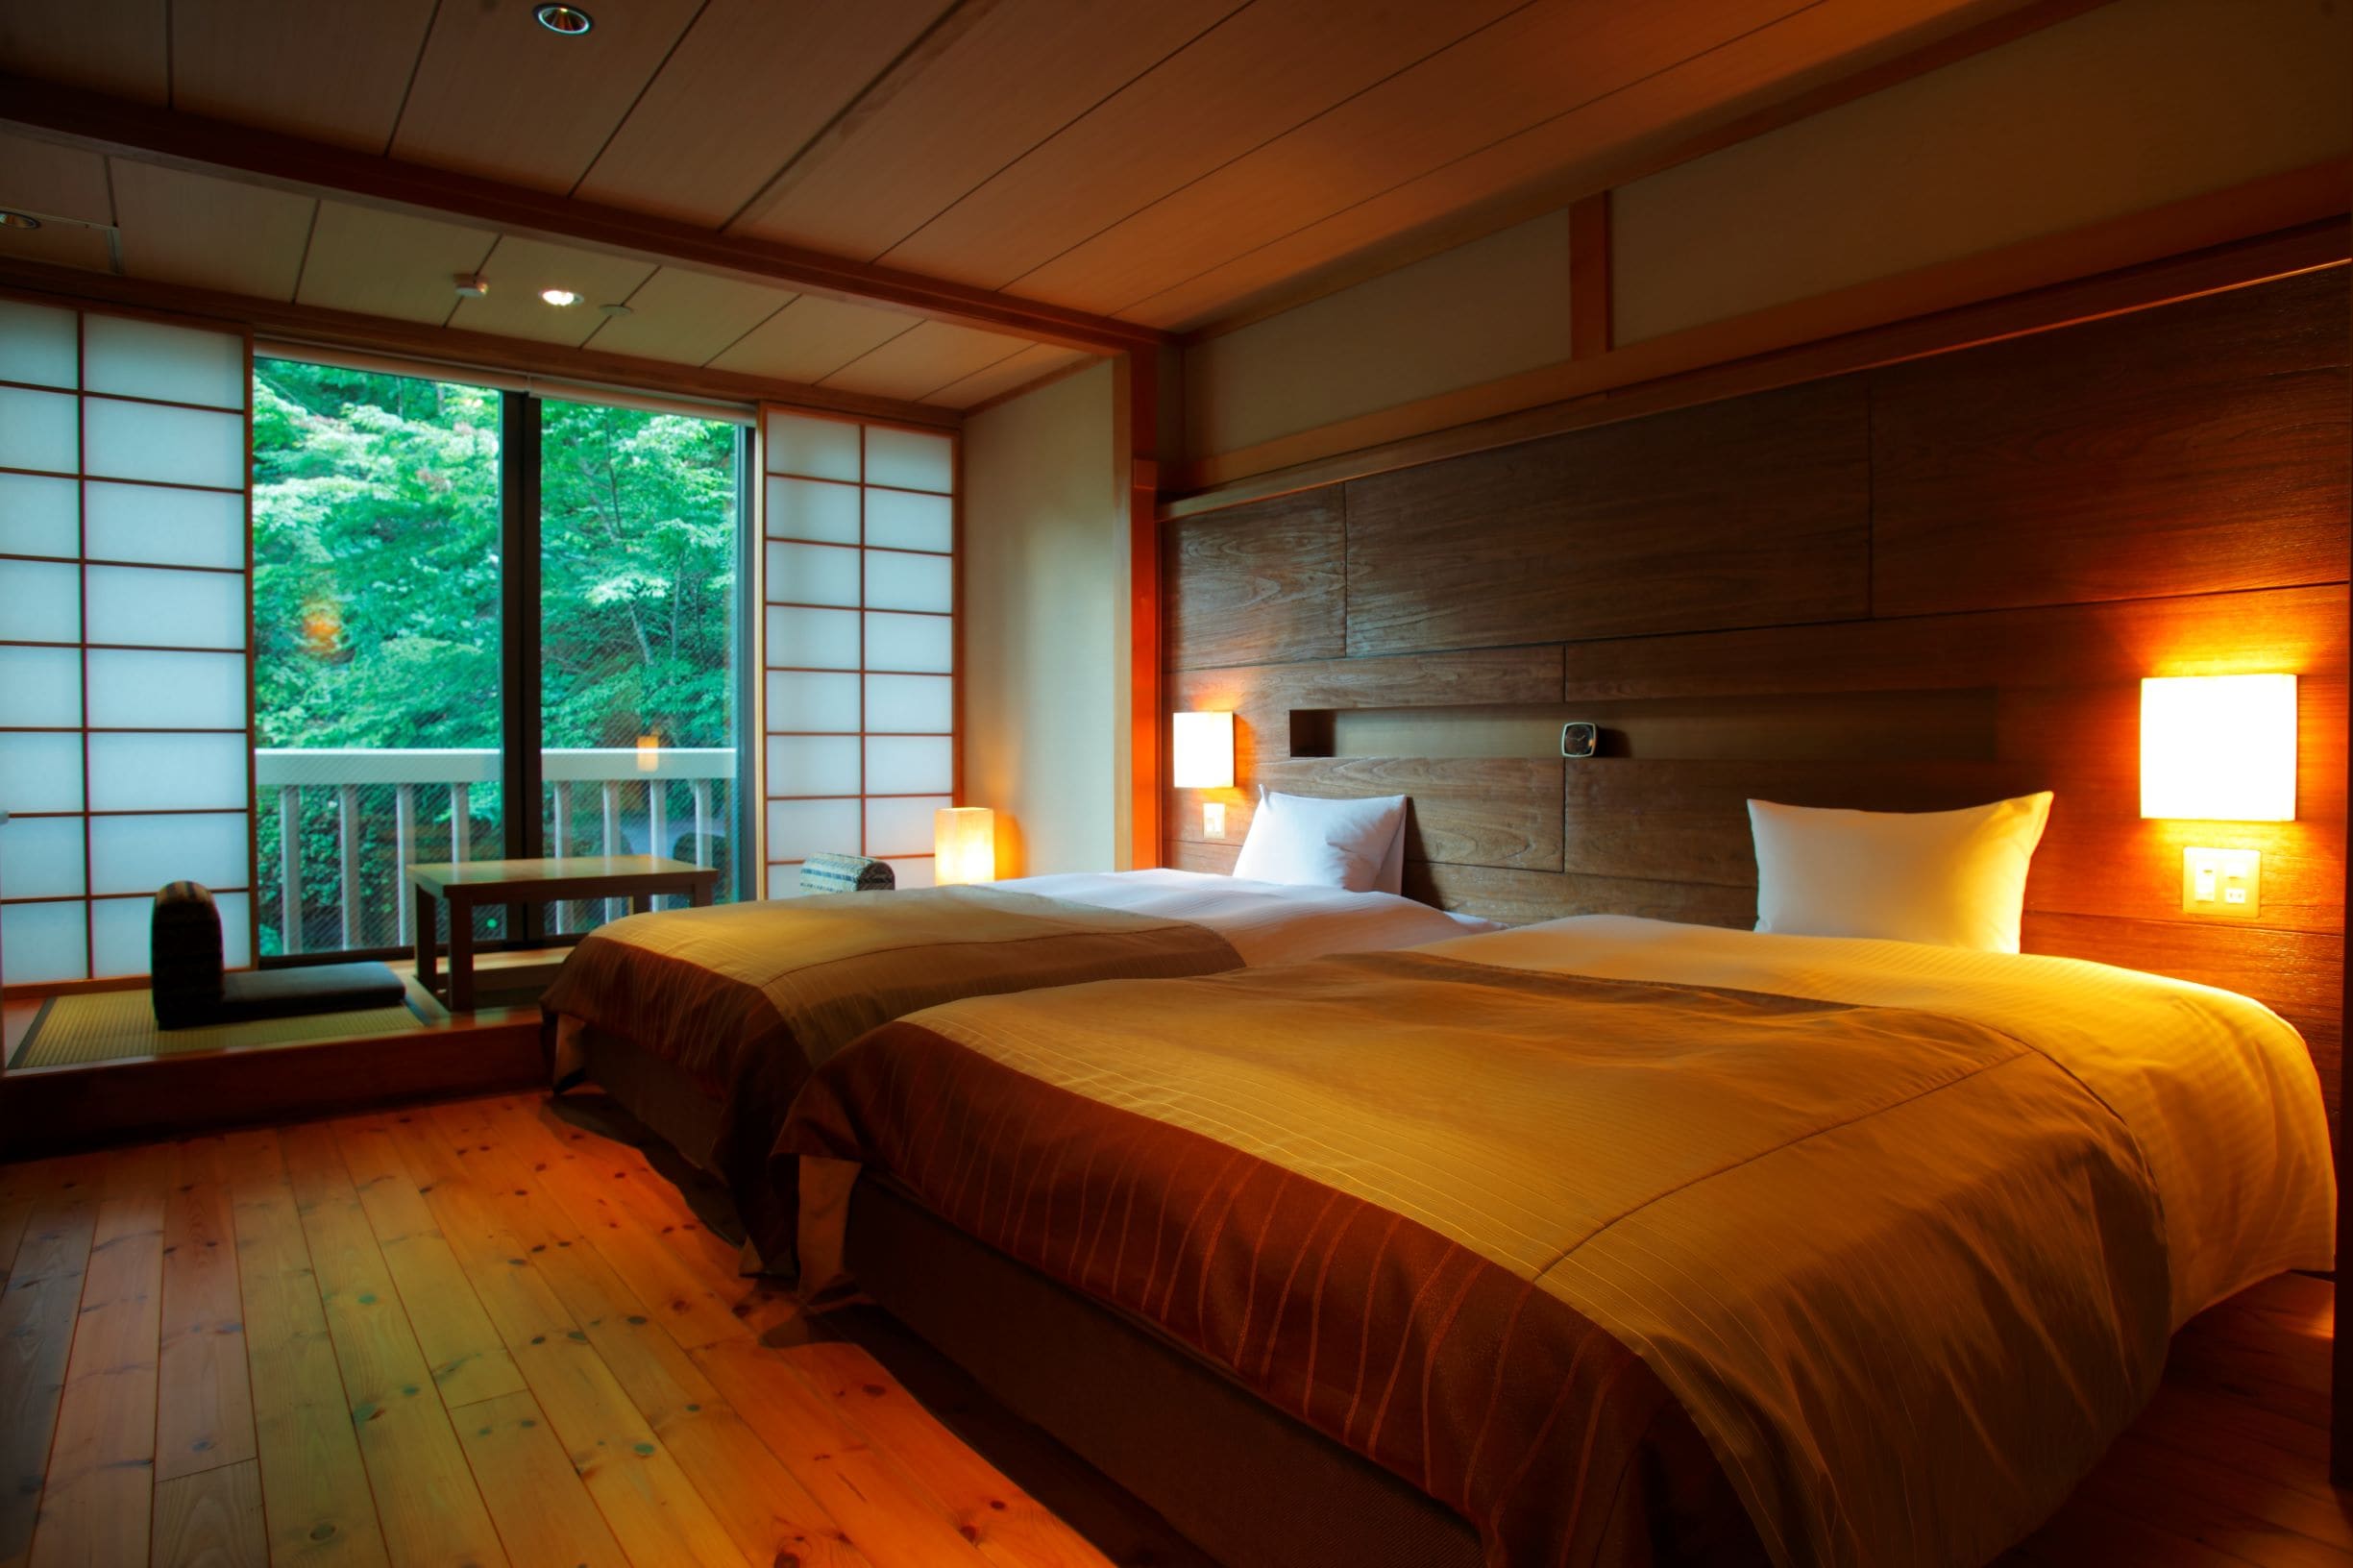 A modern Japanese-Western style room with tatami mats